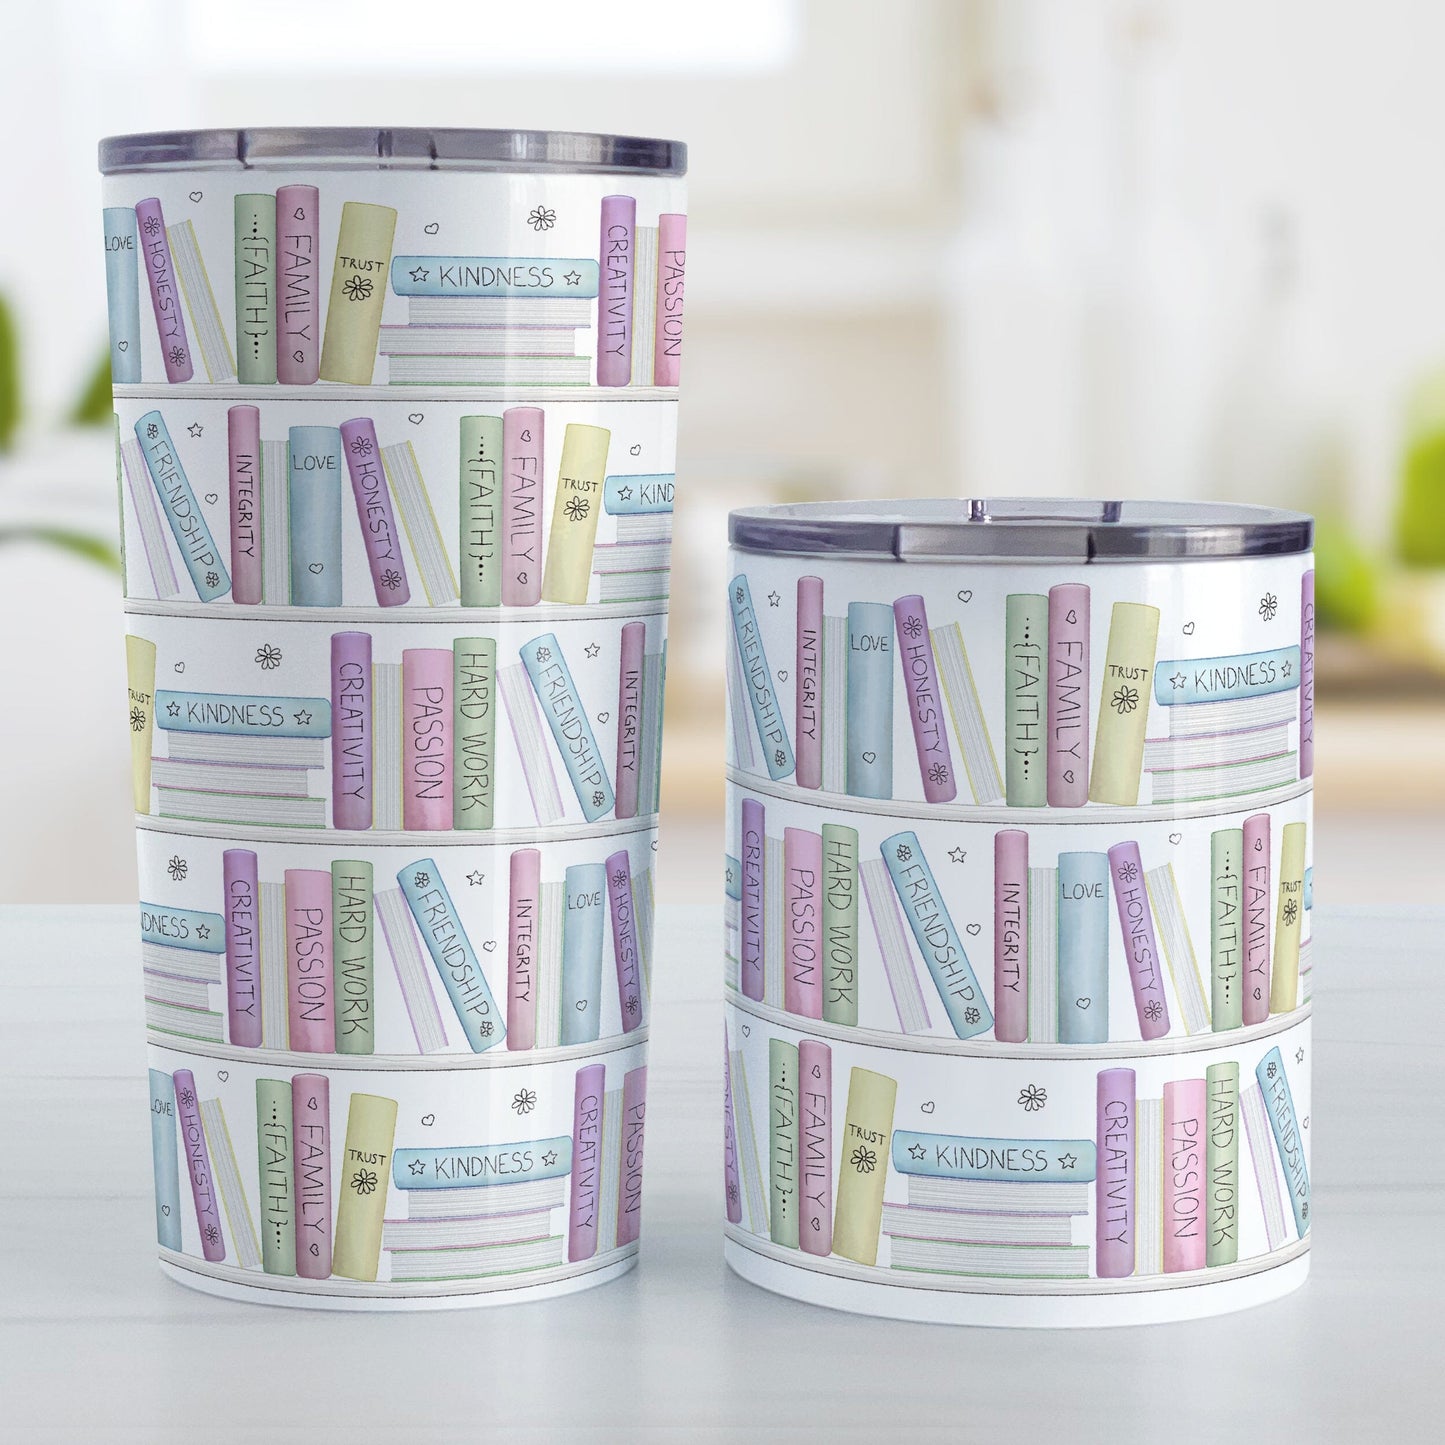 The Building Books of Life - Inspirational Reading Tumbler Cups (20oz or 10oz) at Amy's Coffee Mugs. Stainless steel tumbler cups designed with a colorful pattern of books on a bookshelf each with an inspirational title that all could be considered important building blocks of life, such as love, family, integrity, passion, faith, creativity, and more. Photo shows both sized cups on a table next to each other.